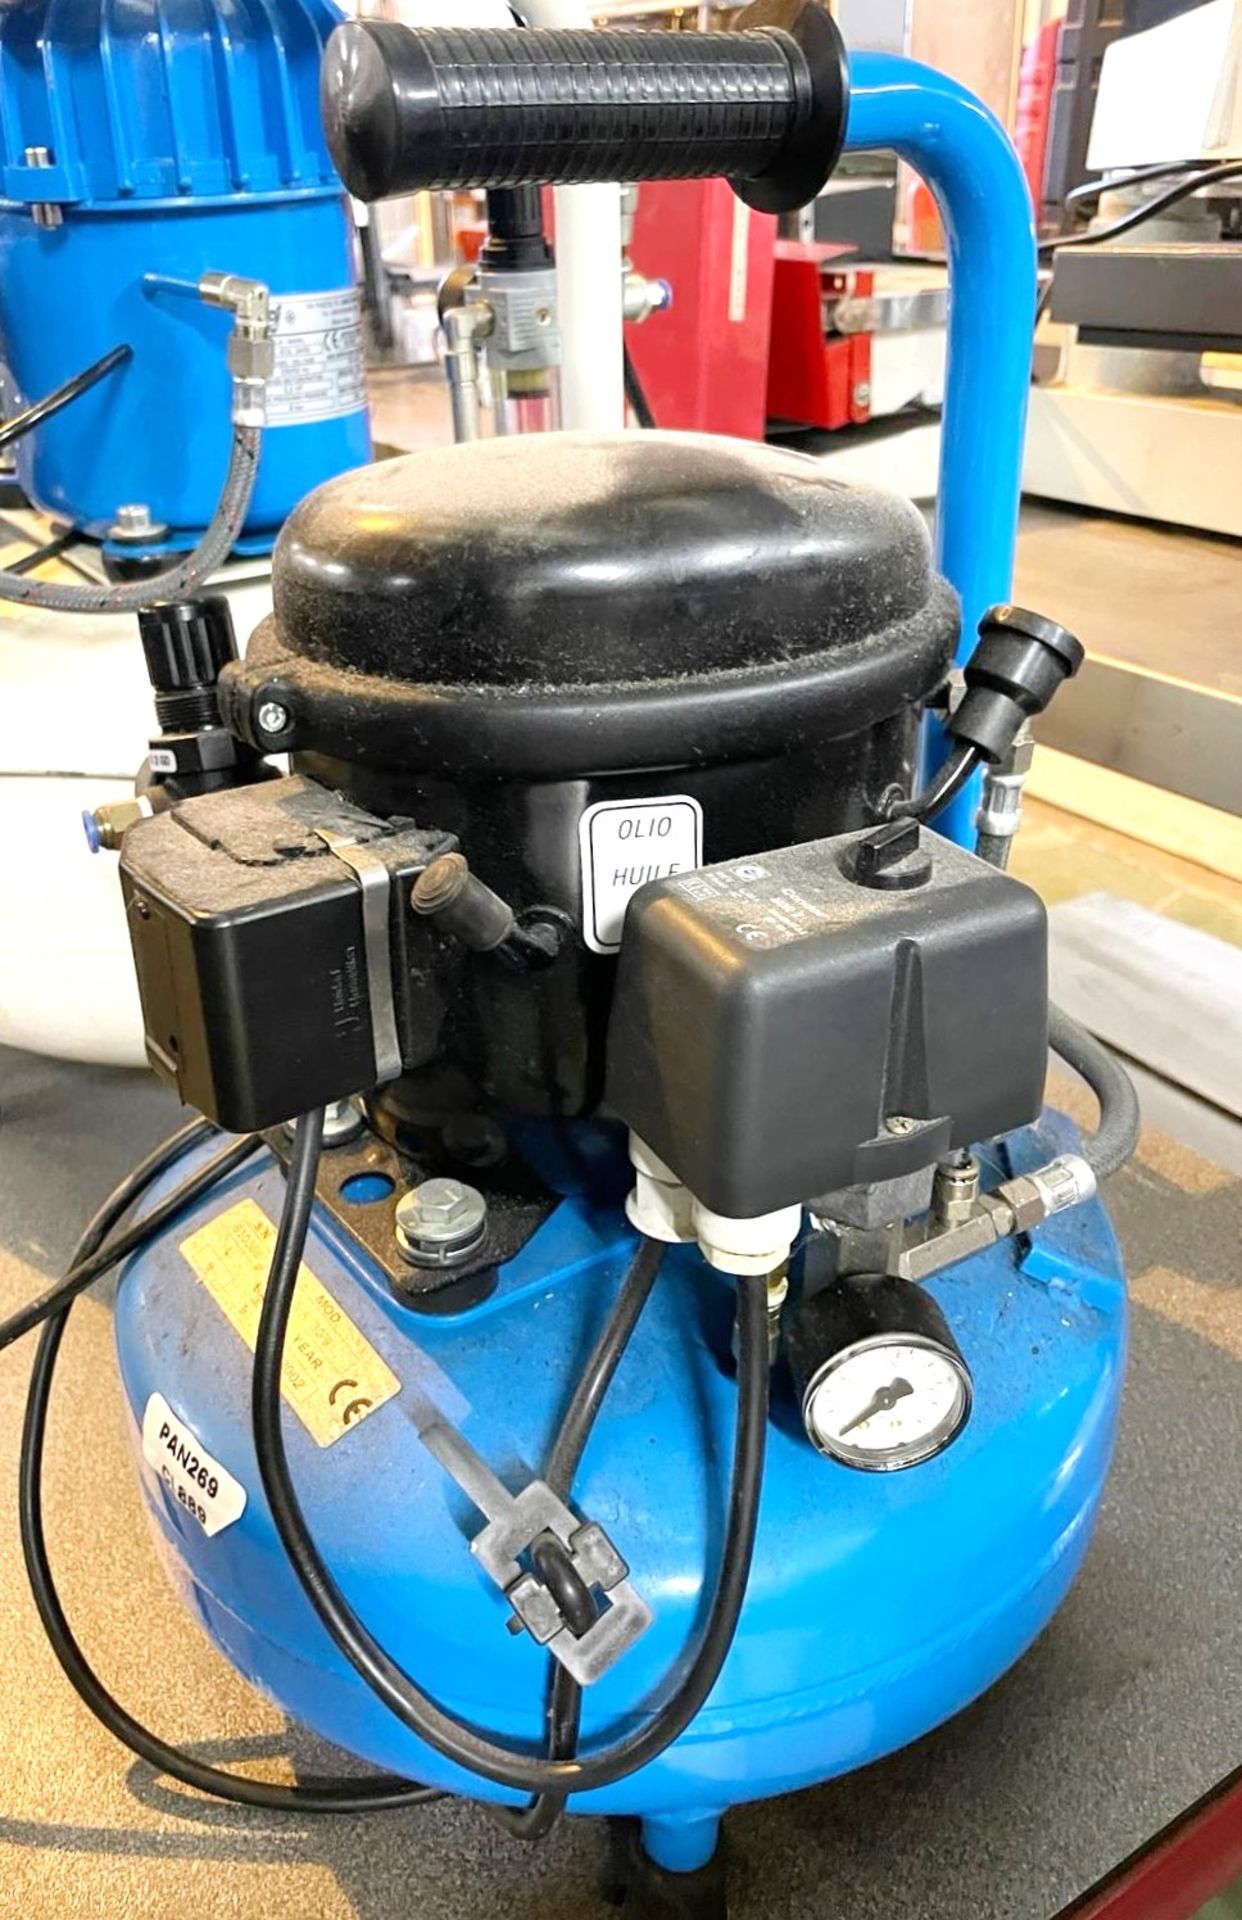 1 x Sil Air 30/9 230v Compressor With 9 Liter Tank - Approx RRP £550